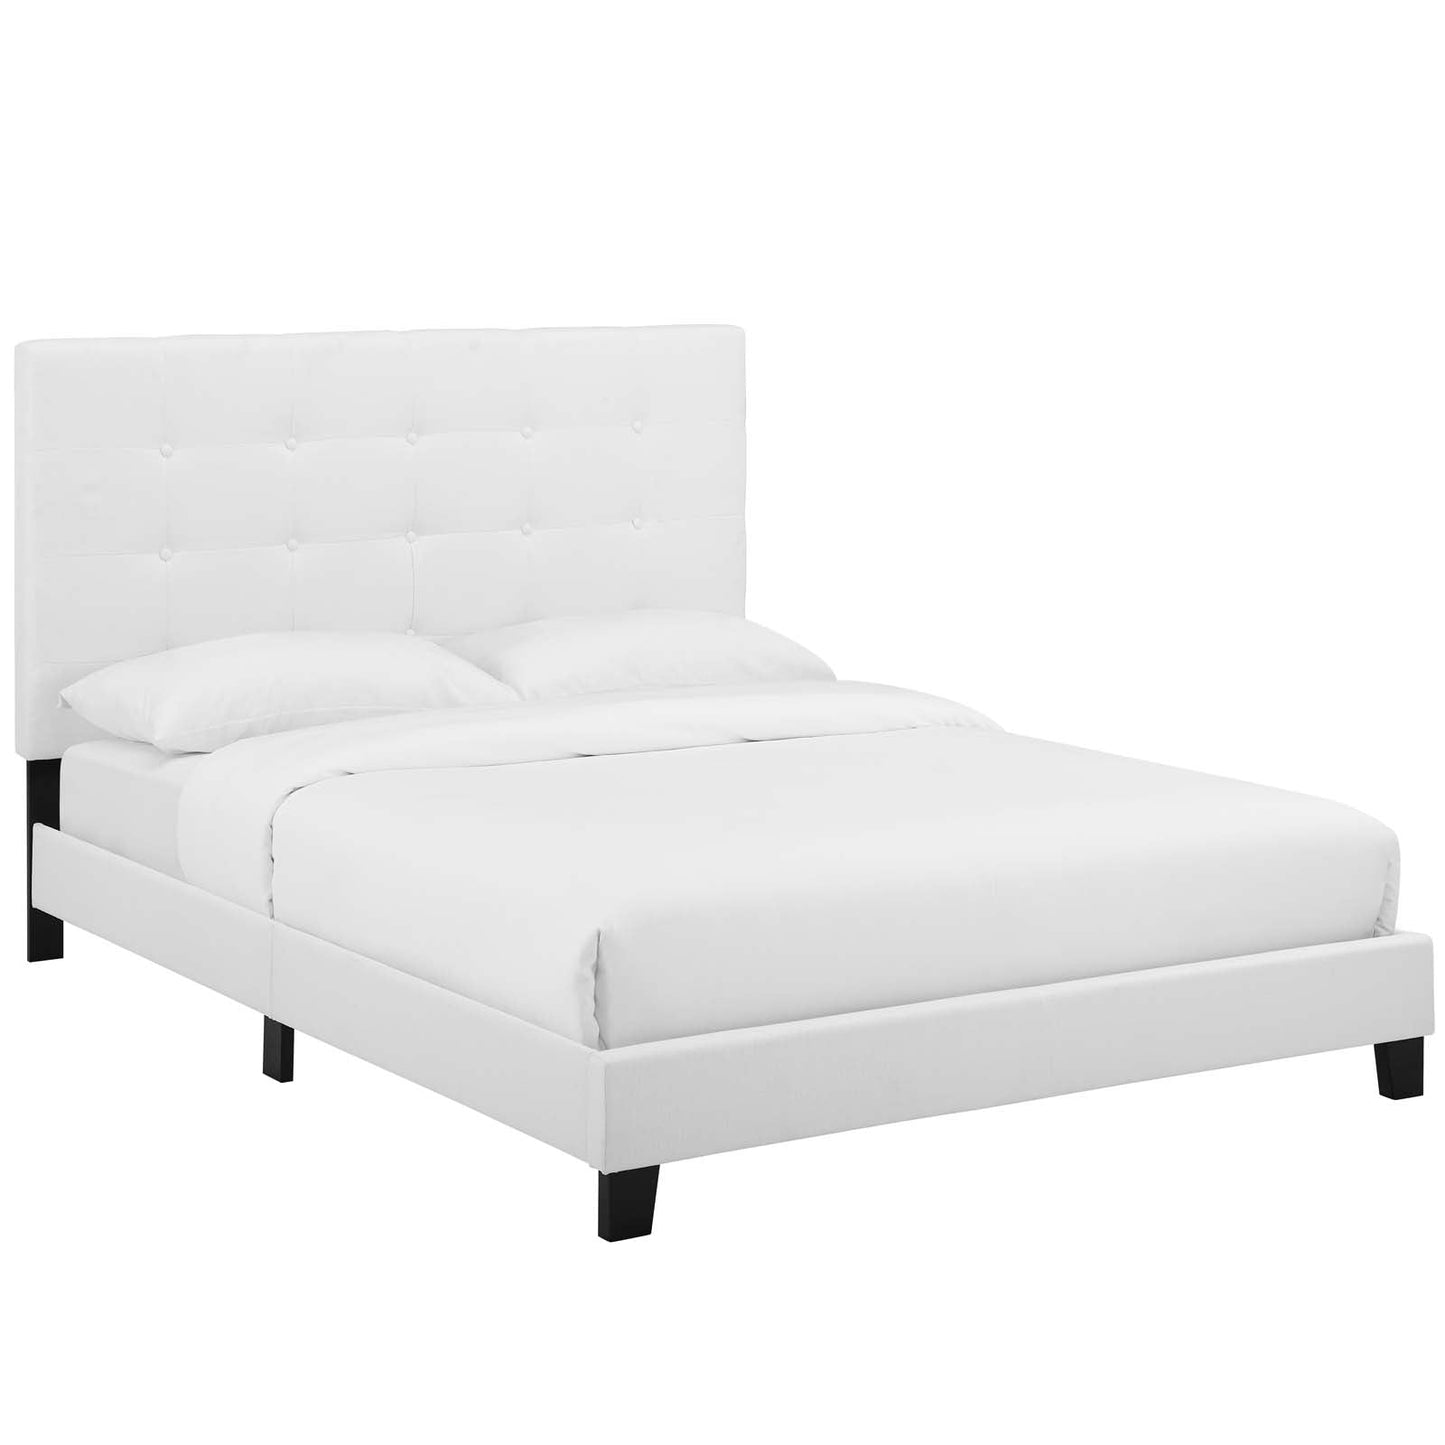 Modway Beds & Bed Frames King / White Melanie Tufted Button Upholstered Fabric Platform Bed MOD-5994-WHI